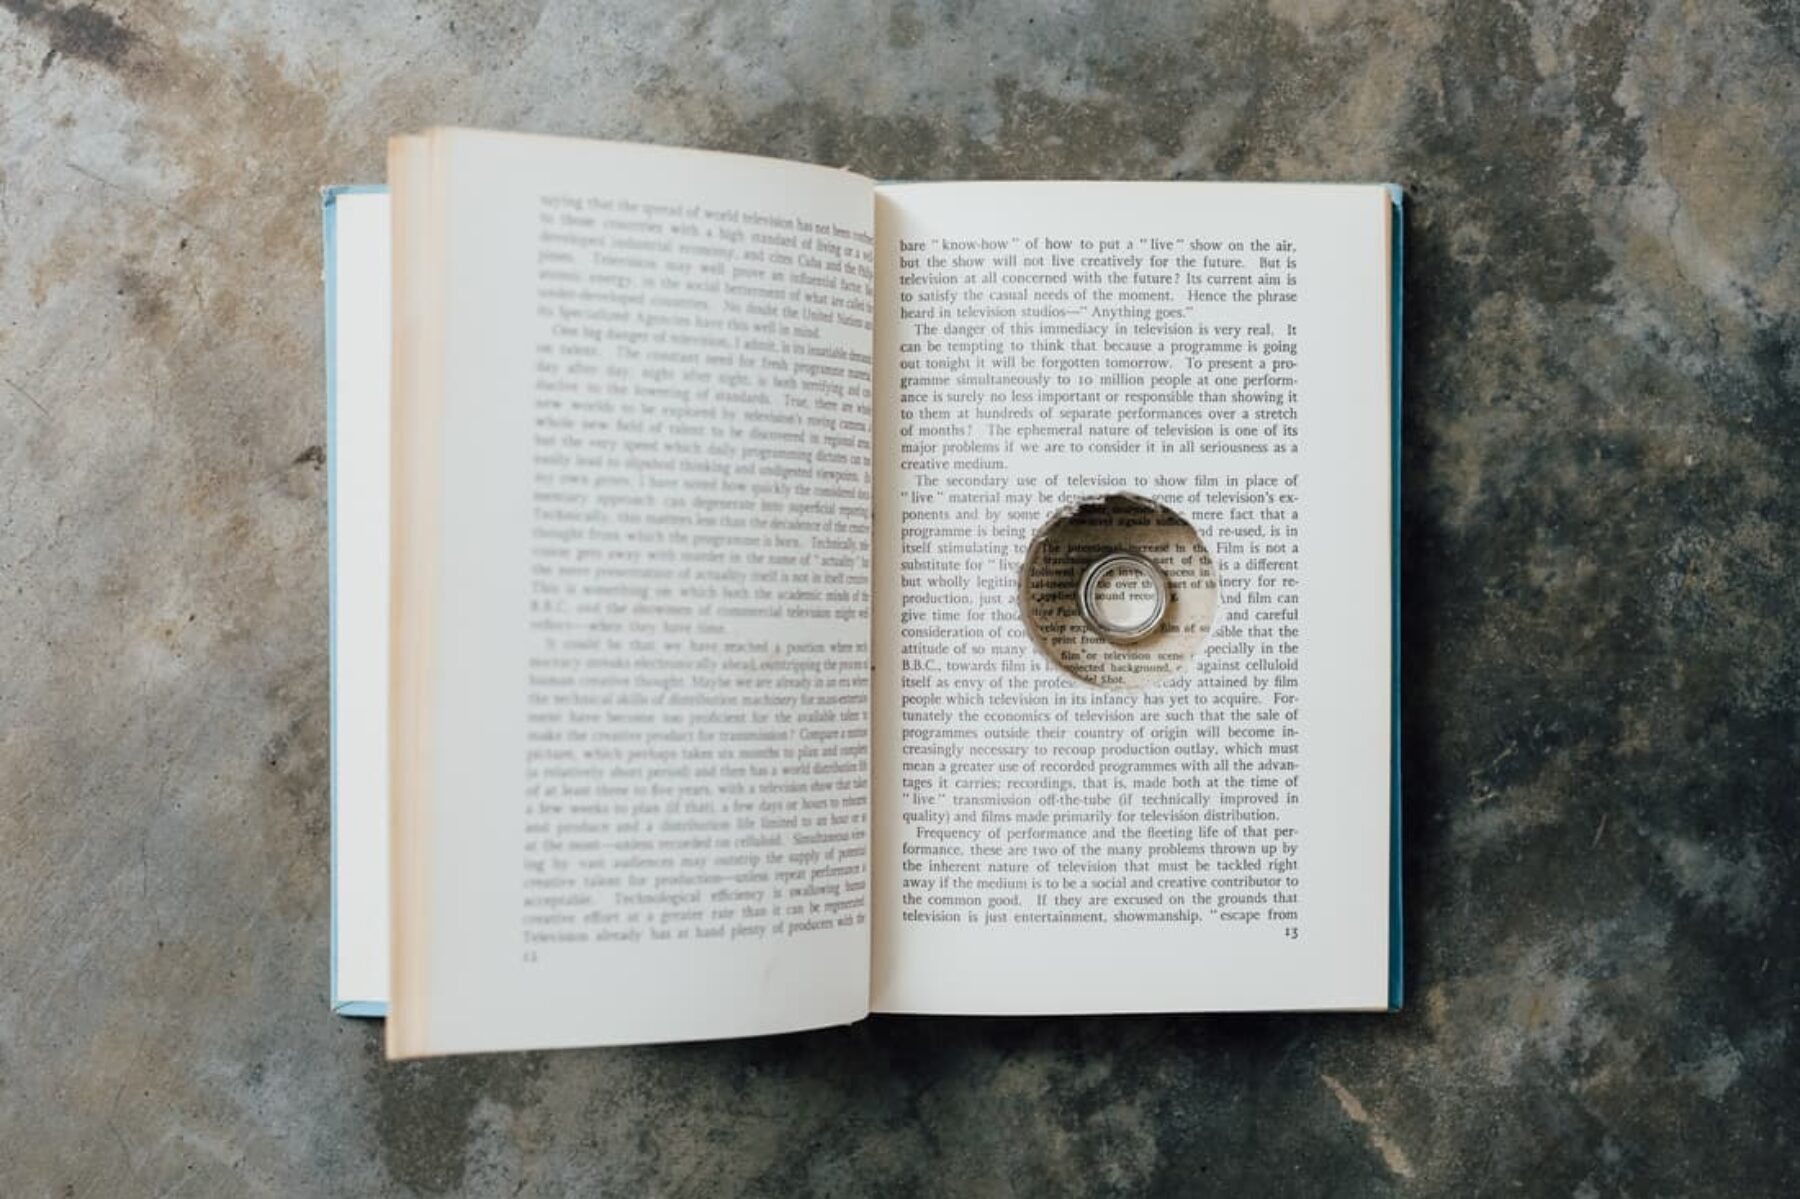 wedding bands in cut-out hollow of book